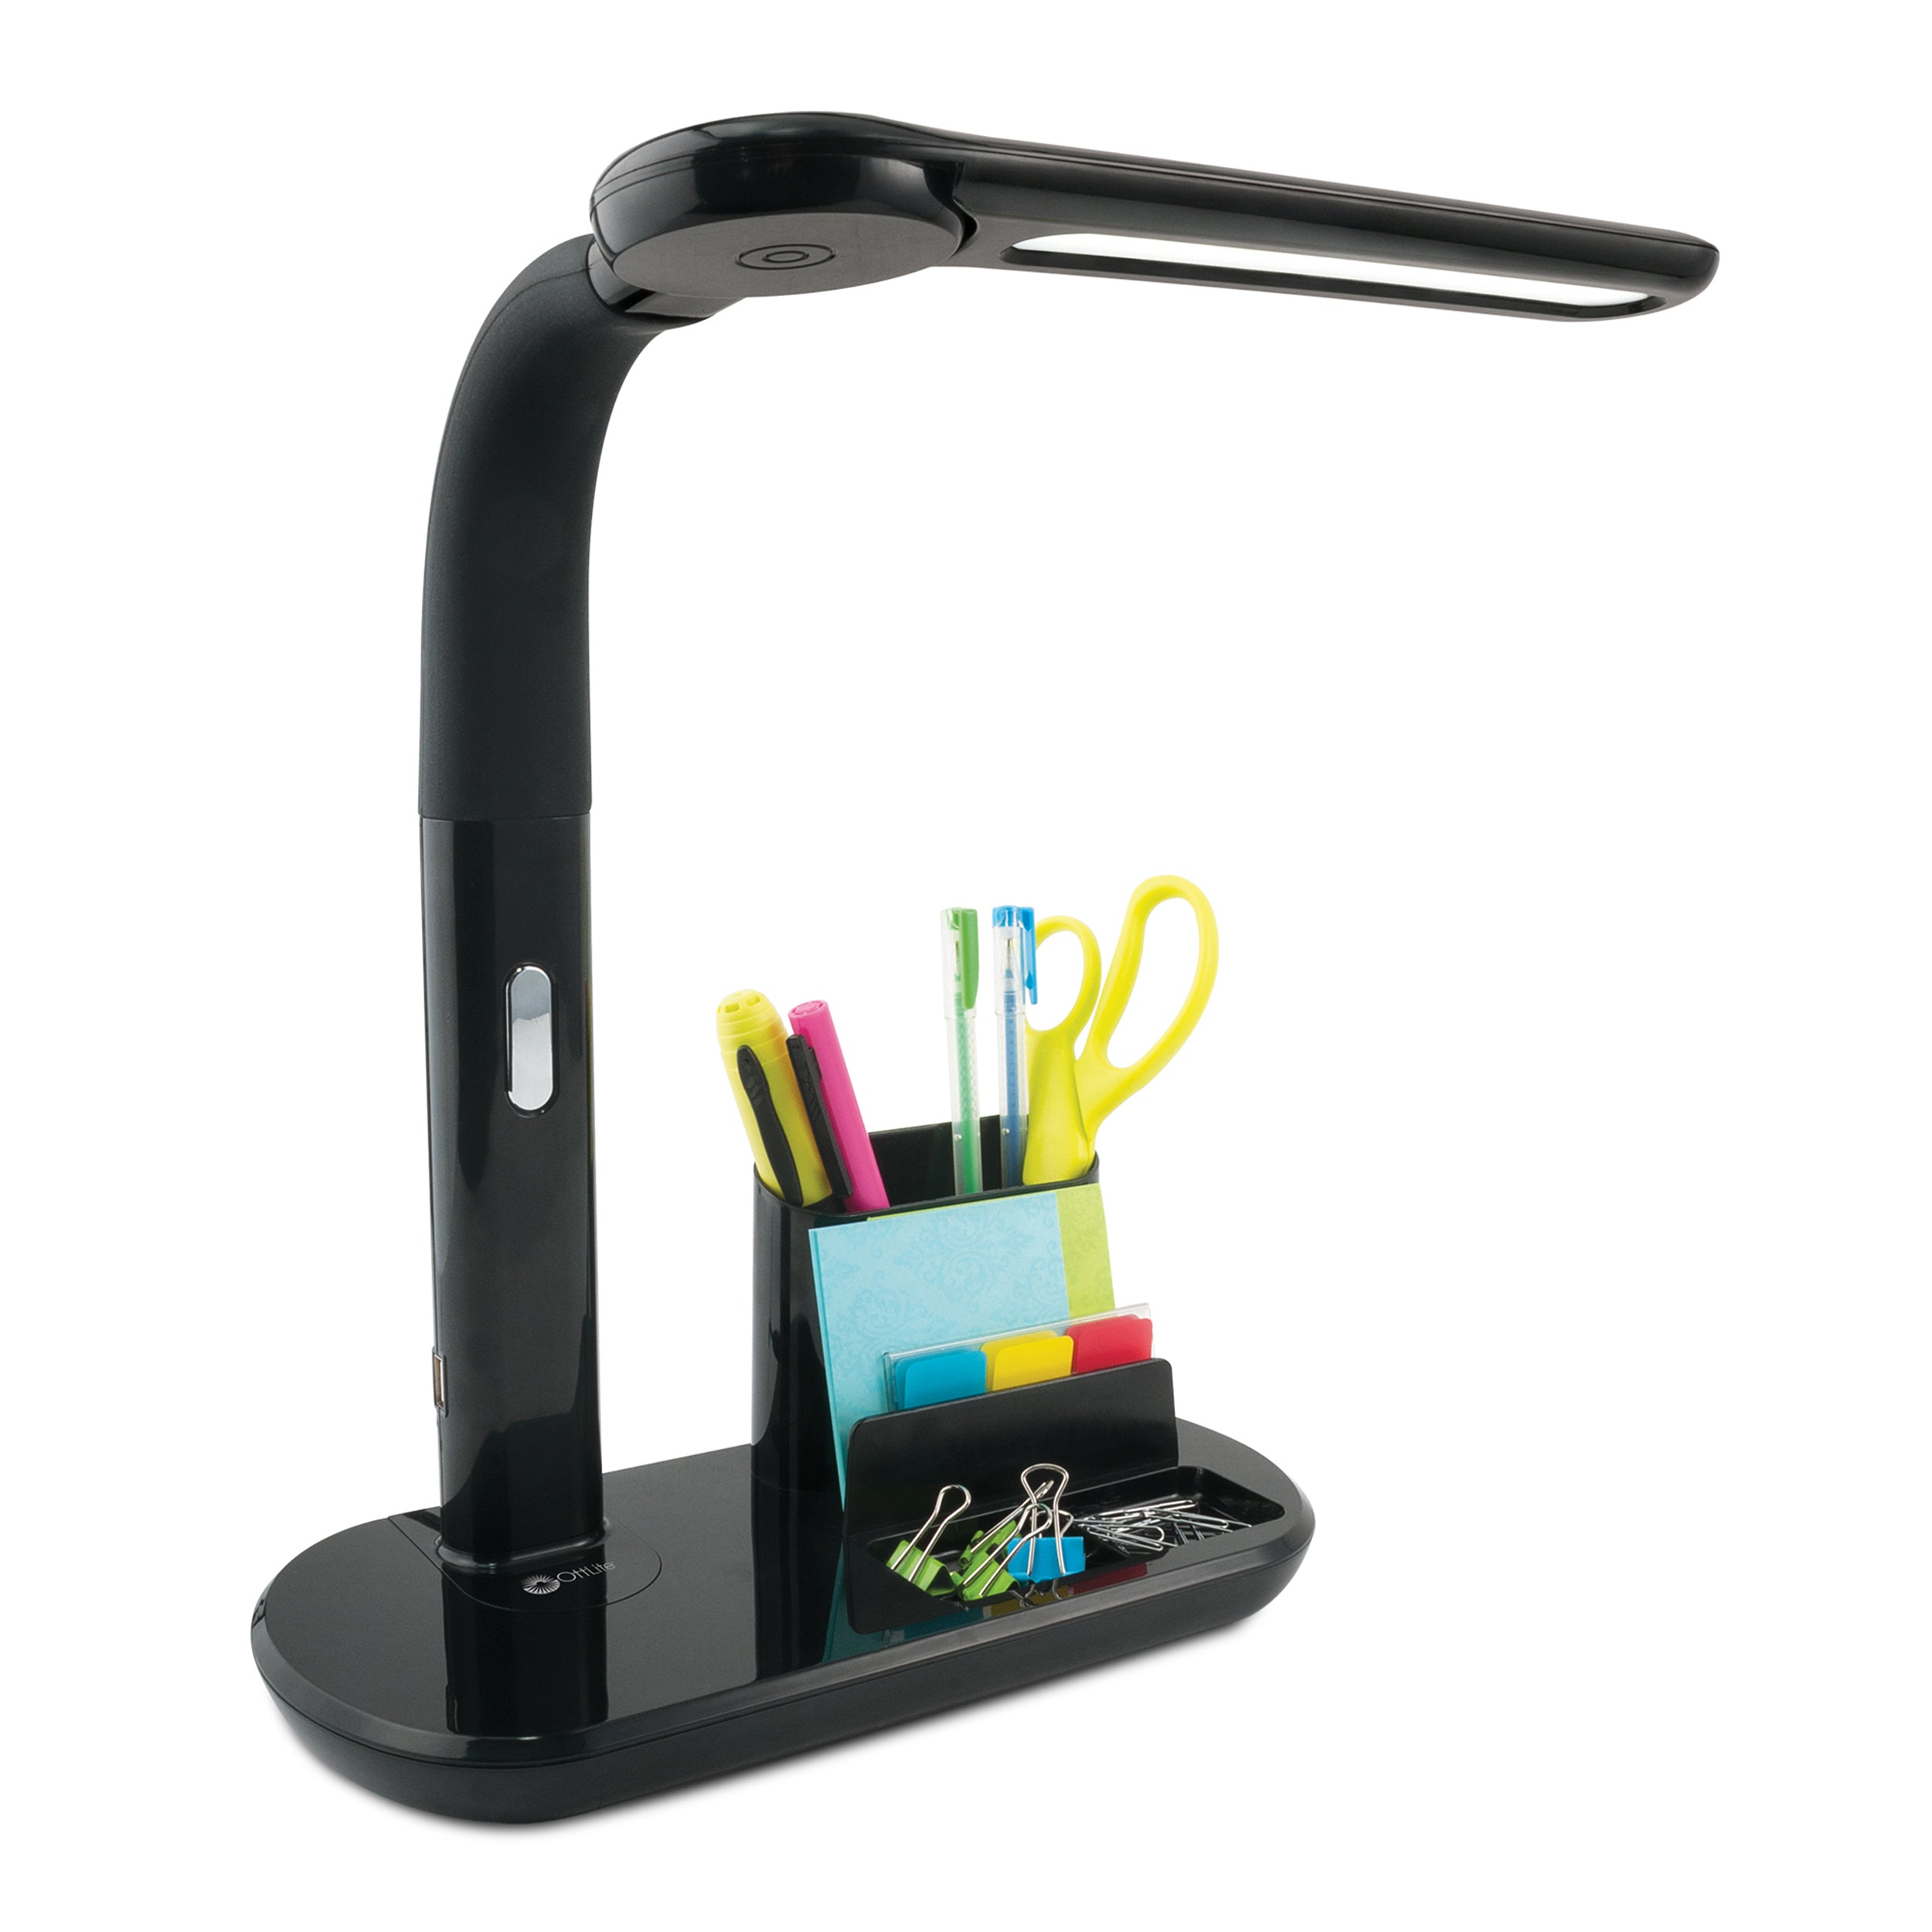 LED Pivoting Bankers Lamp with USB